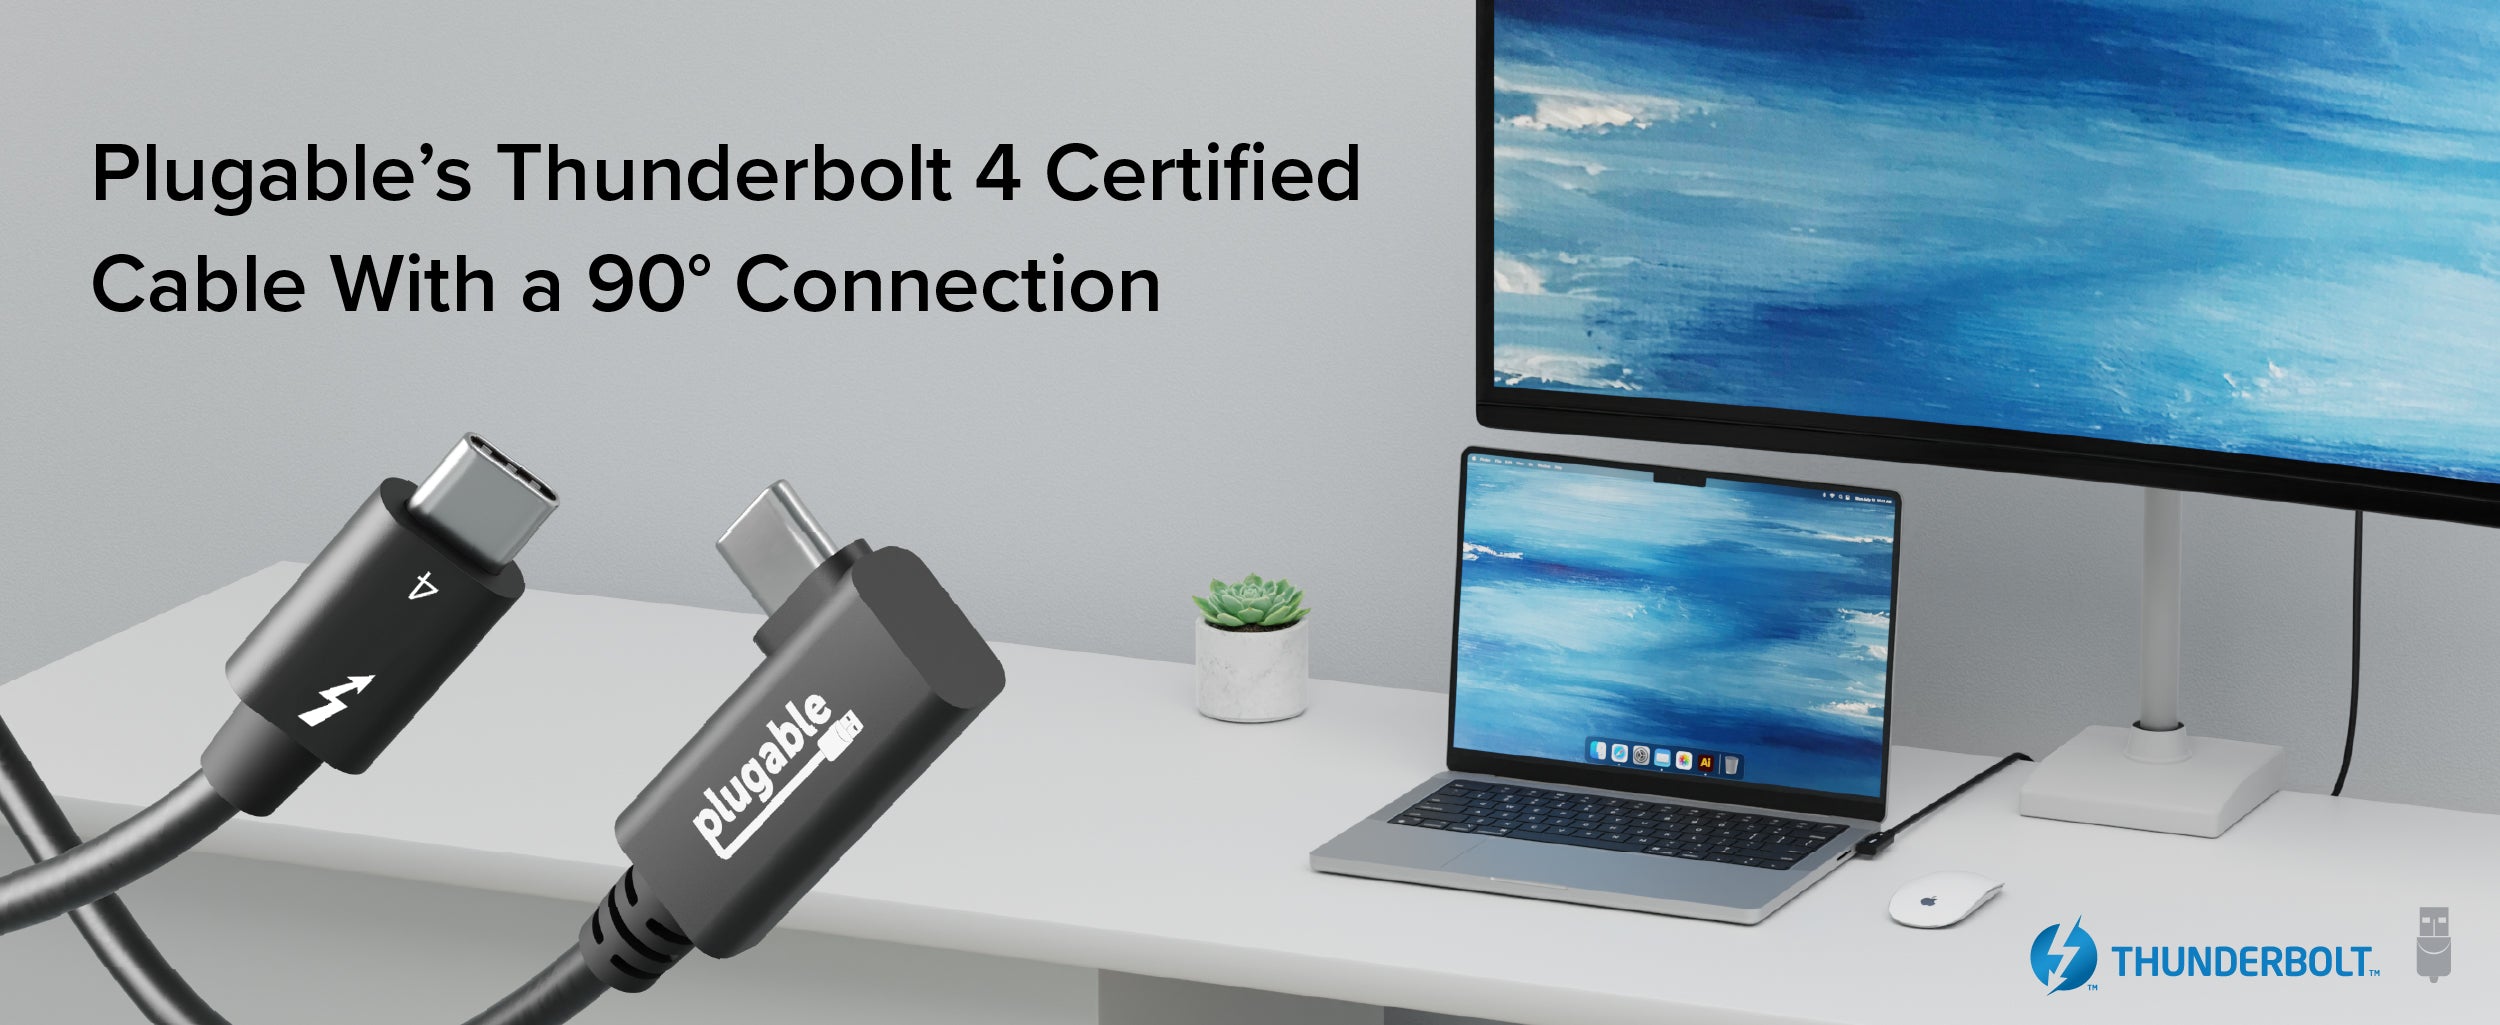 Plugable's Thunderbolt 4 Certified Cable with a 90 connection